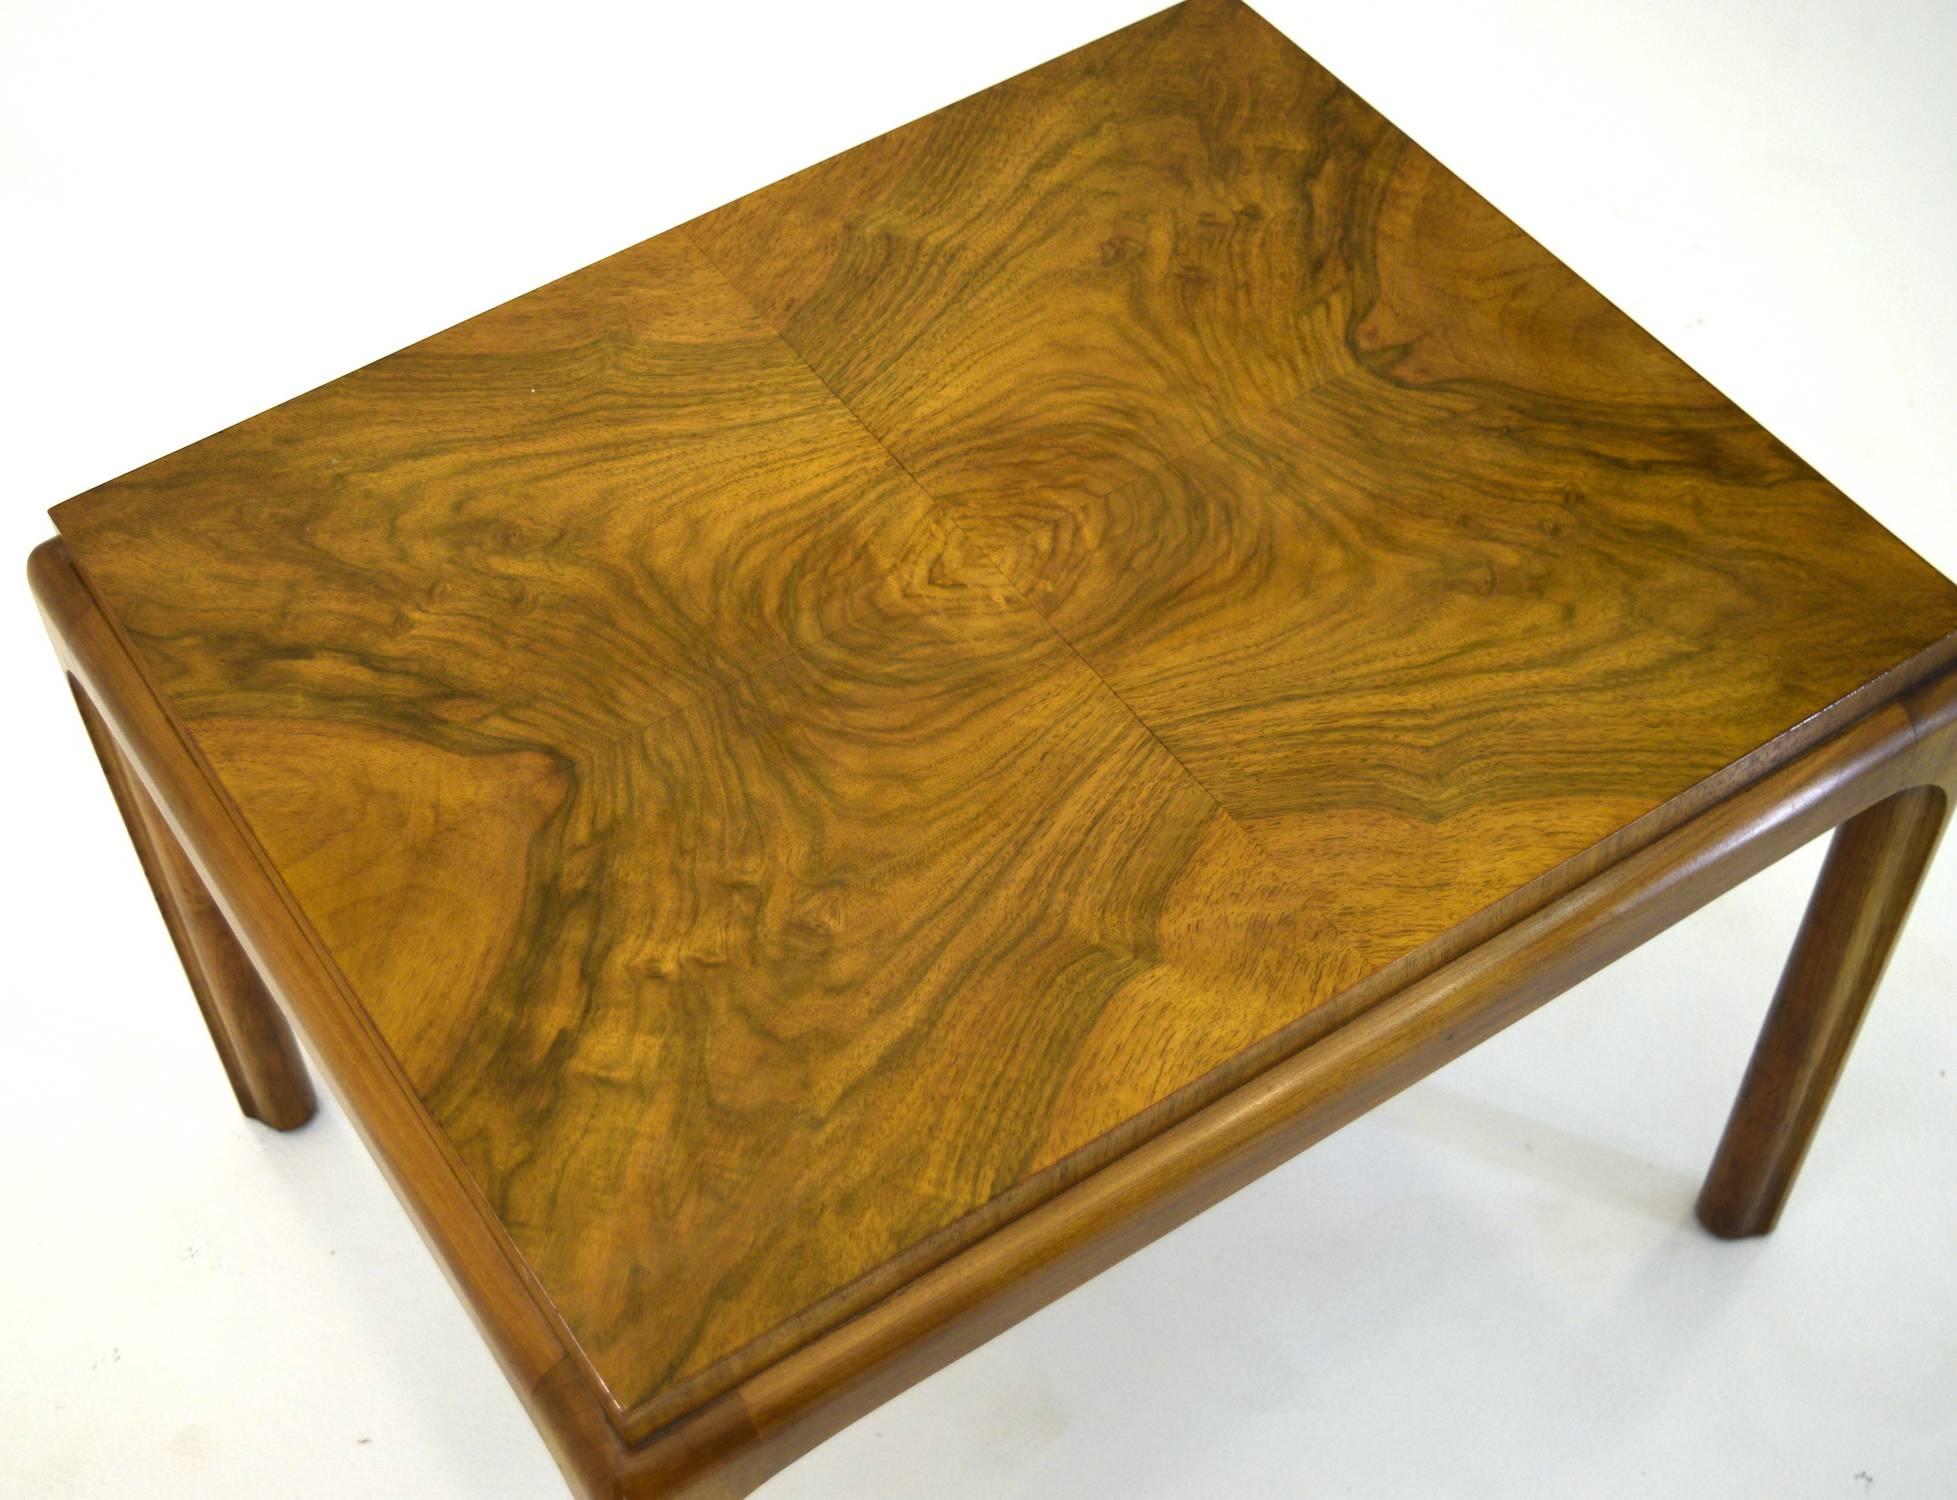 A versatile small coffee table by John Widdicomb in bookmatched burl on the top with finely crafted legs. The table top is raised giving a plinth style appearance. 

Measures: 22" x 18" and 16.25" tall.

Note the legs and